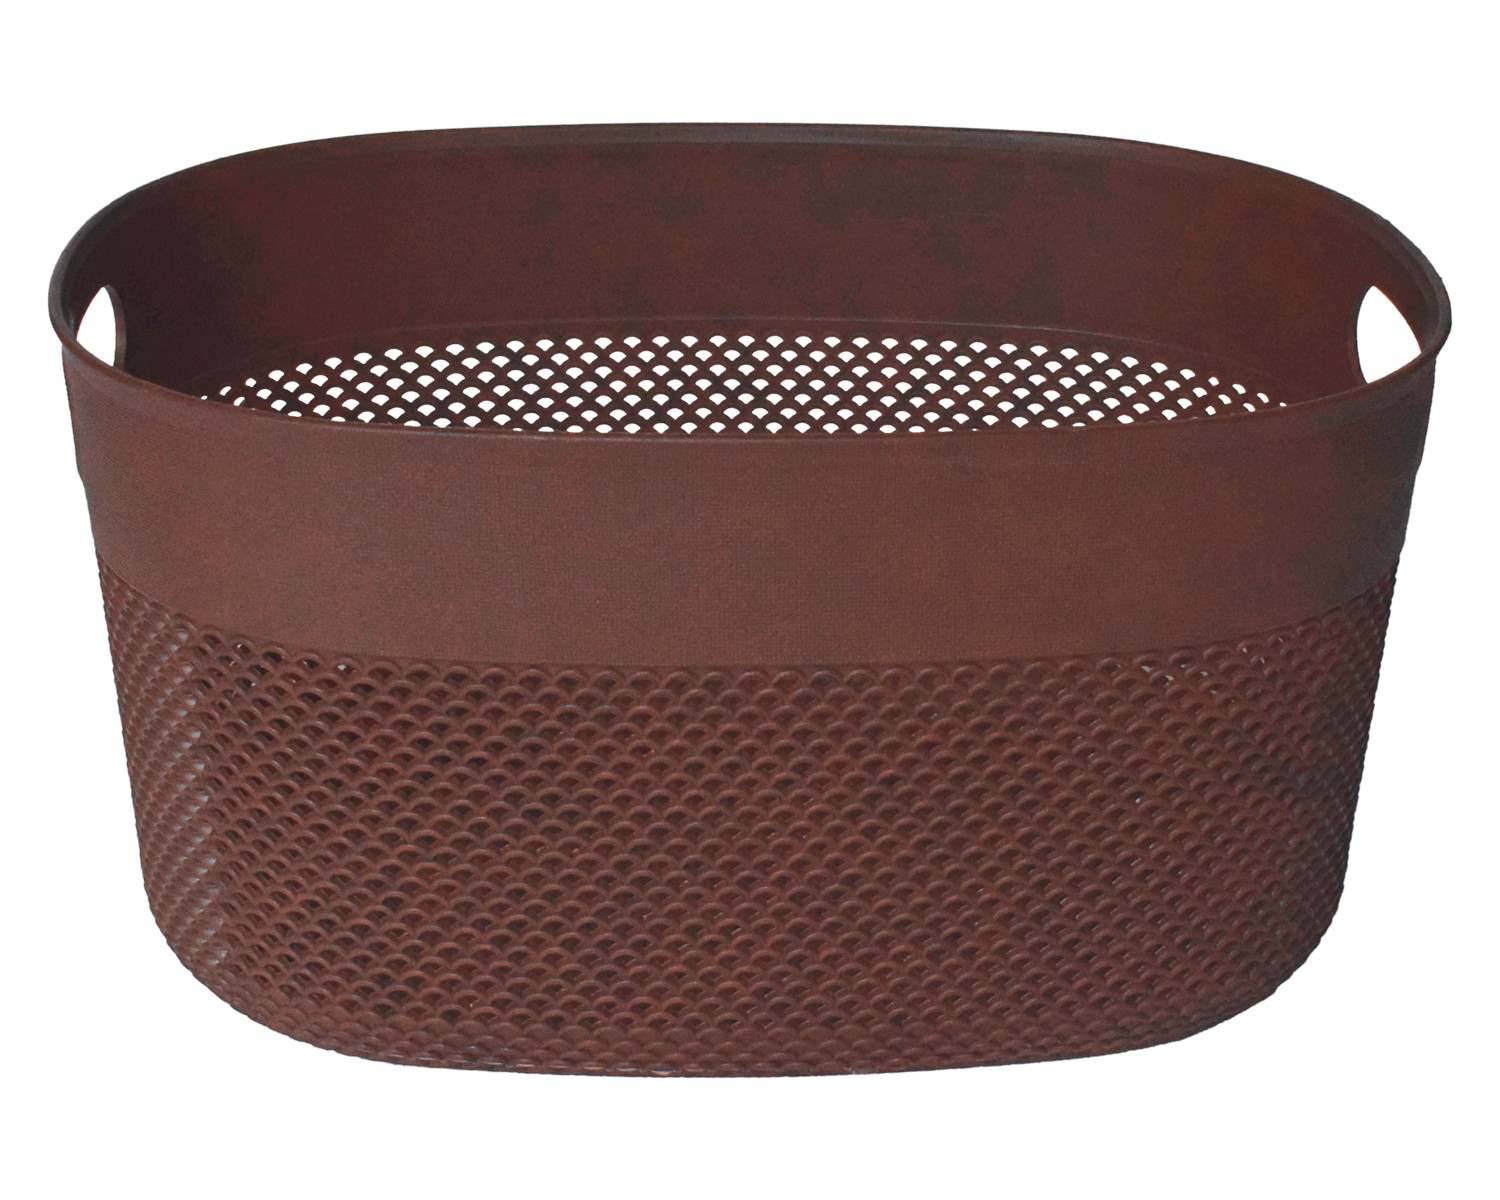 Kuber Industries Unbreakable Small Multipurpose Storage Baskets with lid|Design-Netted|Material-Plastic|Shape-Oval|Color-Brown